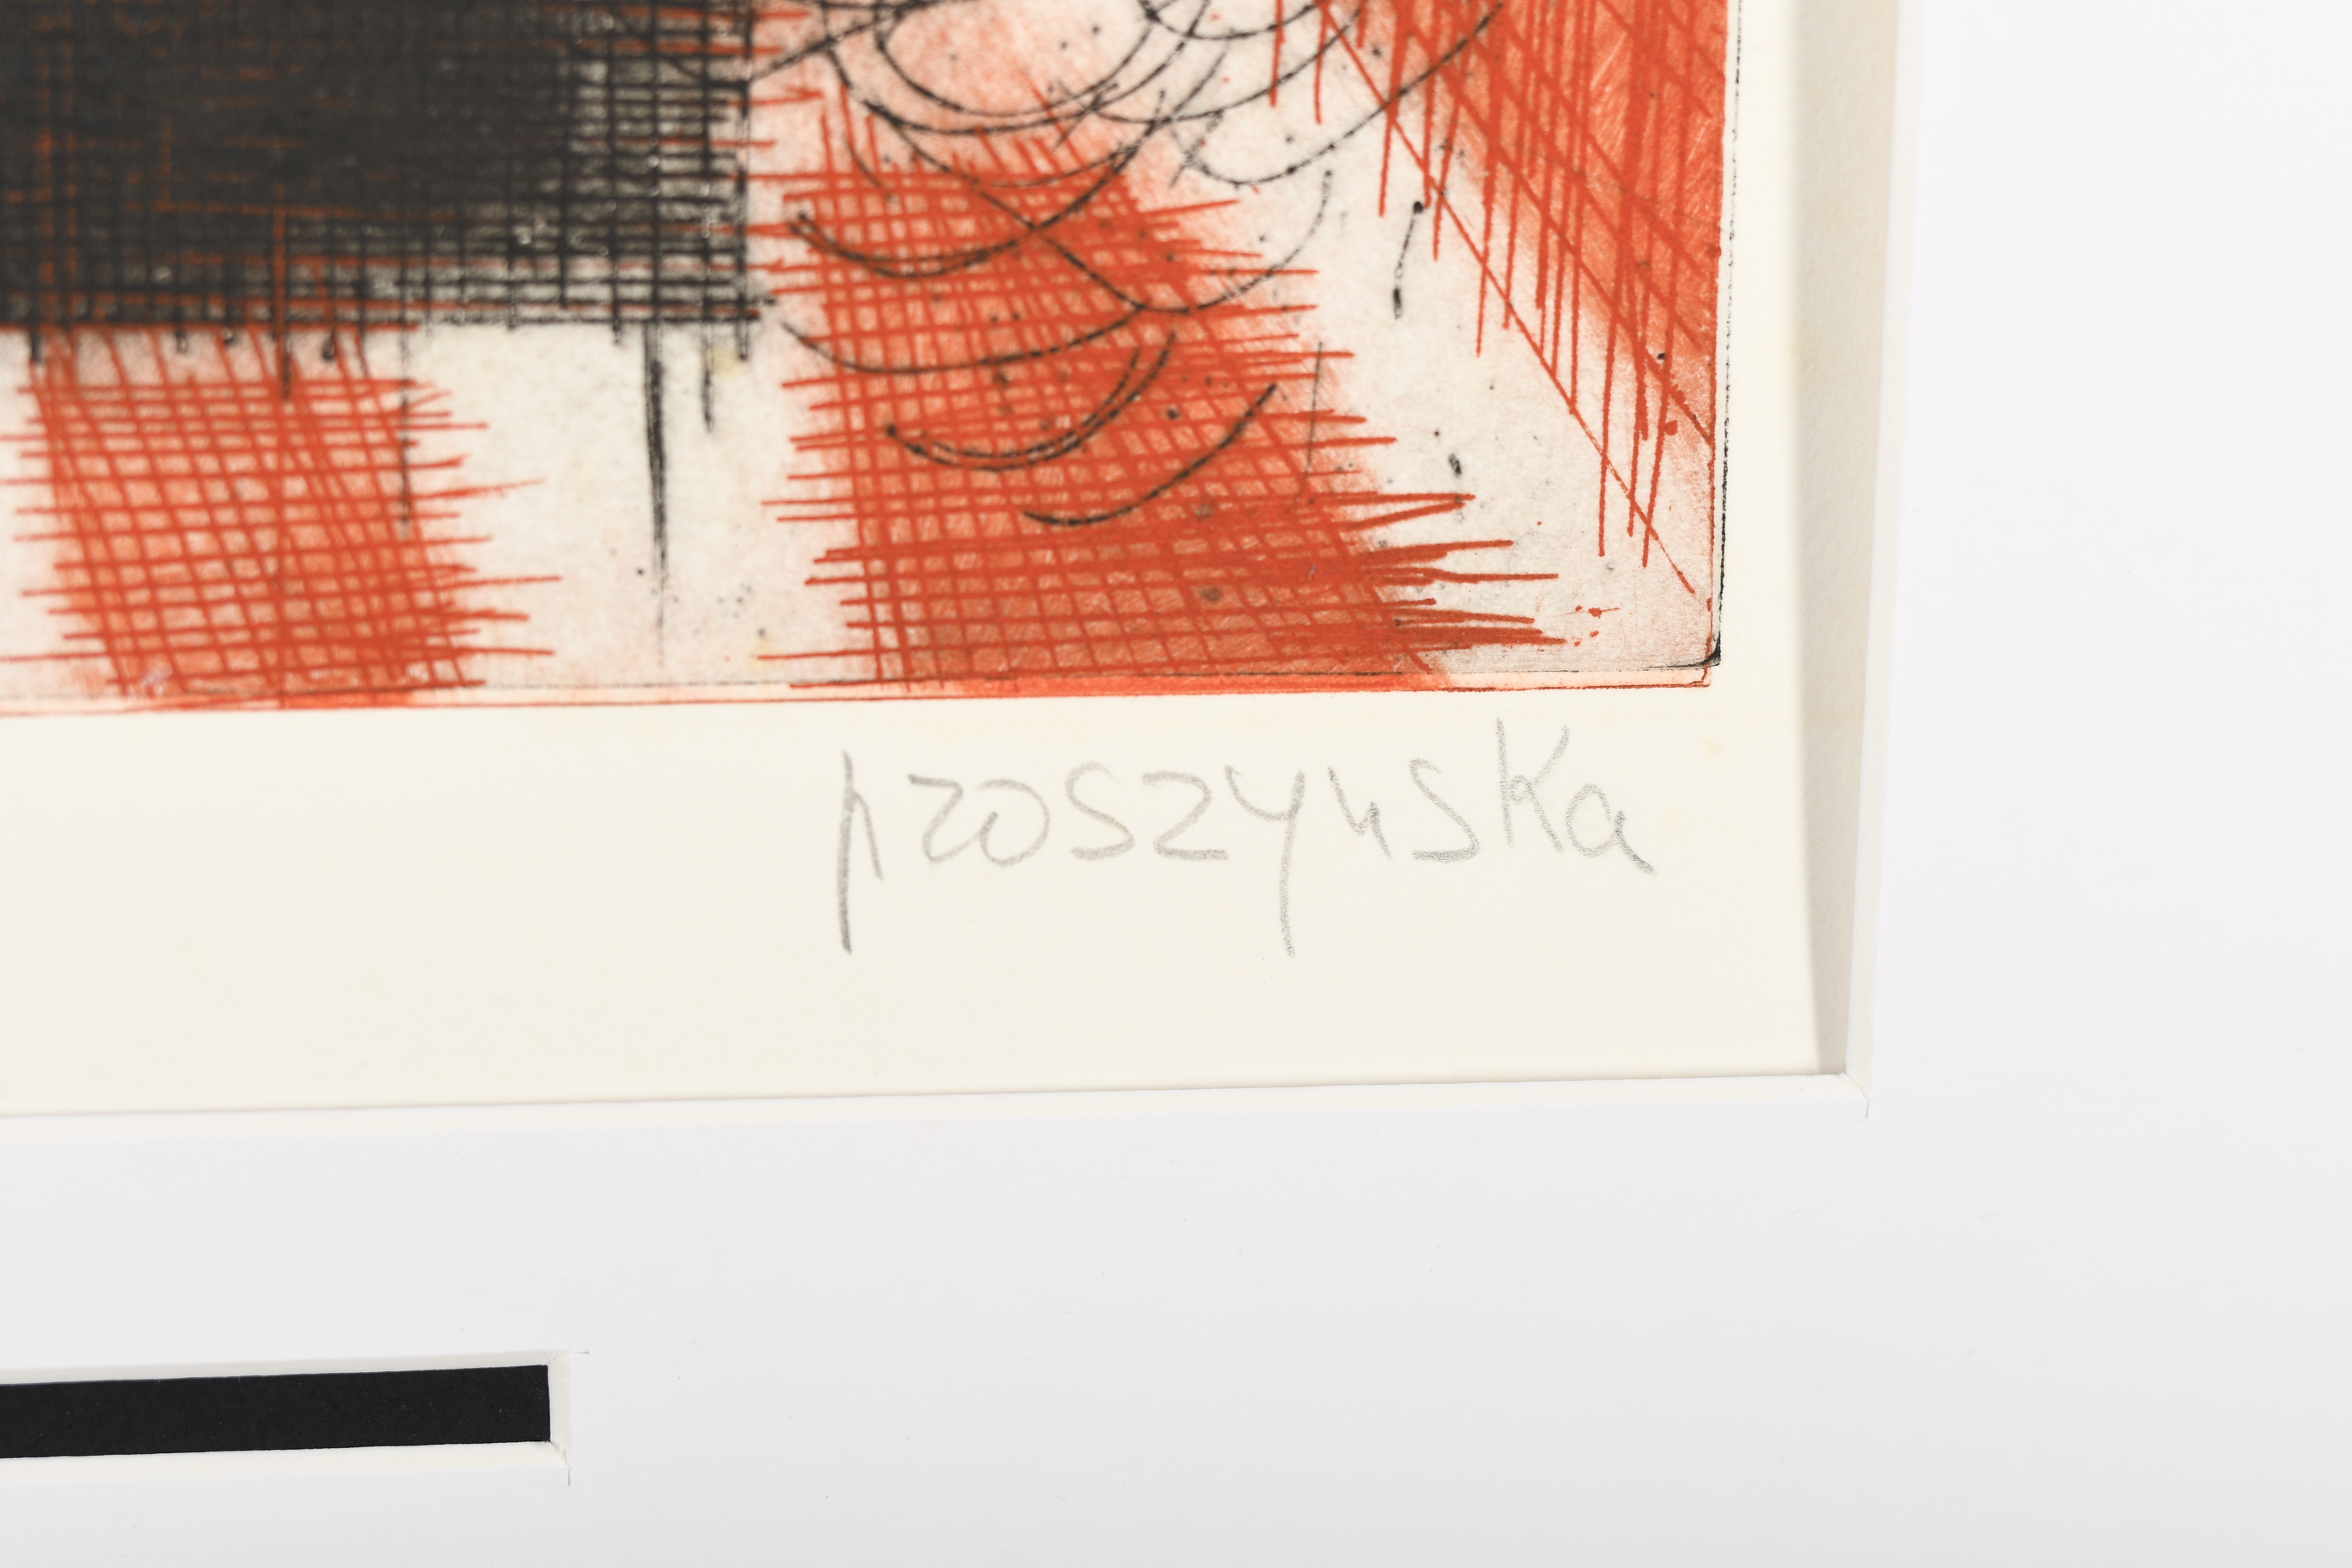 Signed Limited Edition by Annie Proszynska (1924-2008) - Image 4 of 7